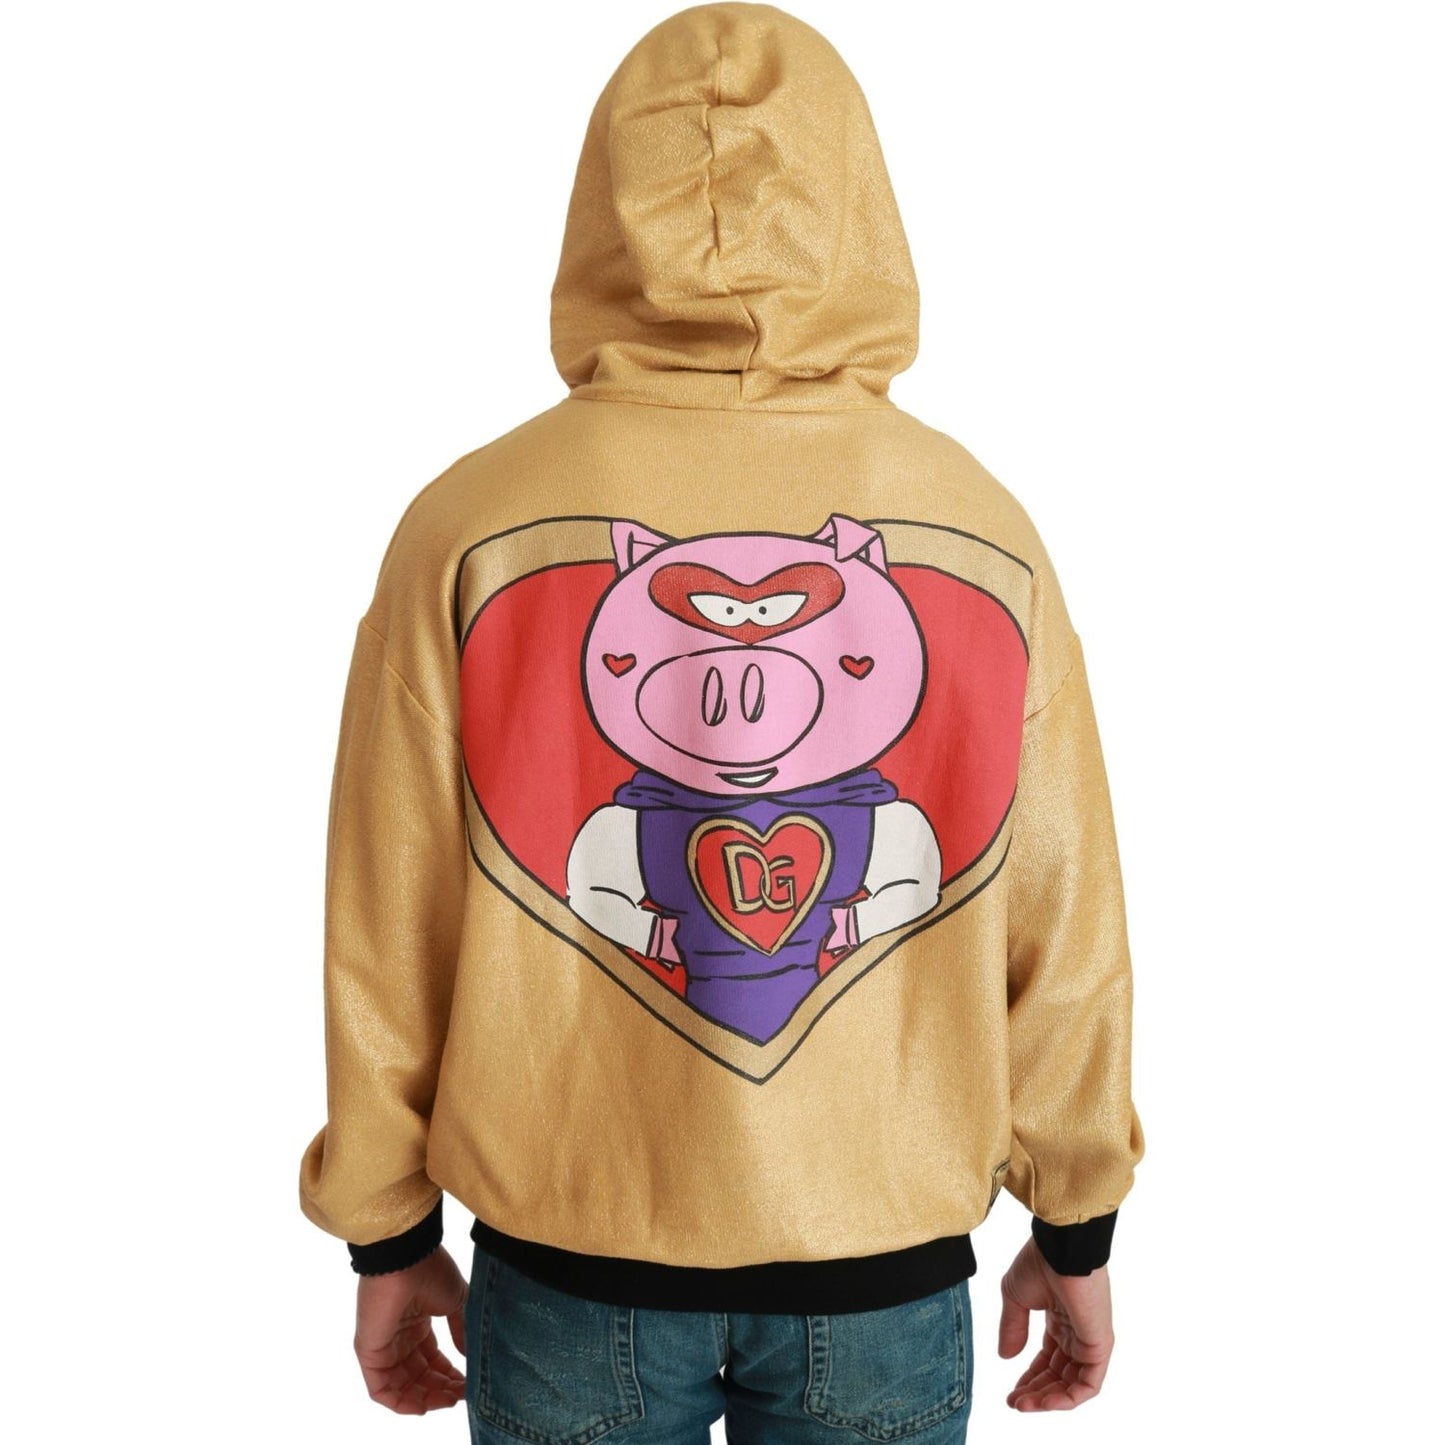 Dolce & Gabbana Exquisite Gold Hooded Cotton Sweater gold-pig-of-the-year-hooded-sweater